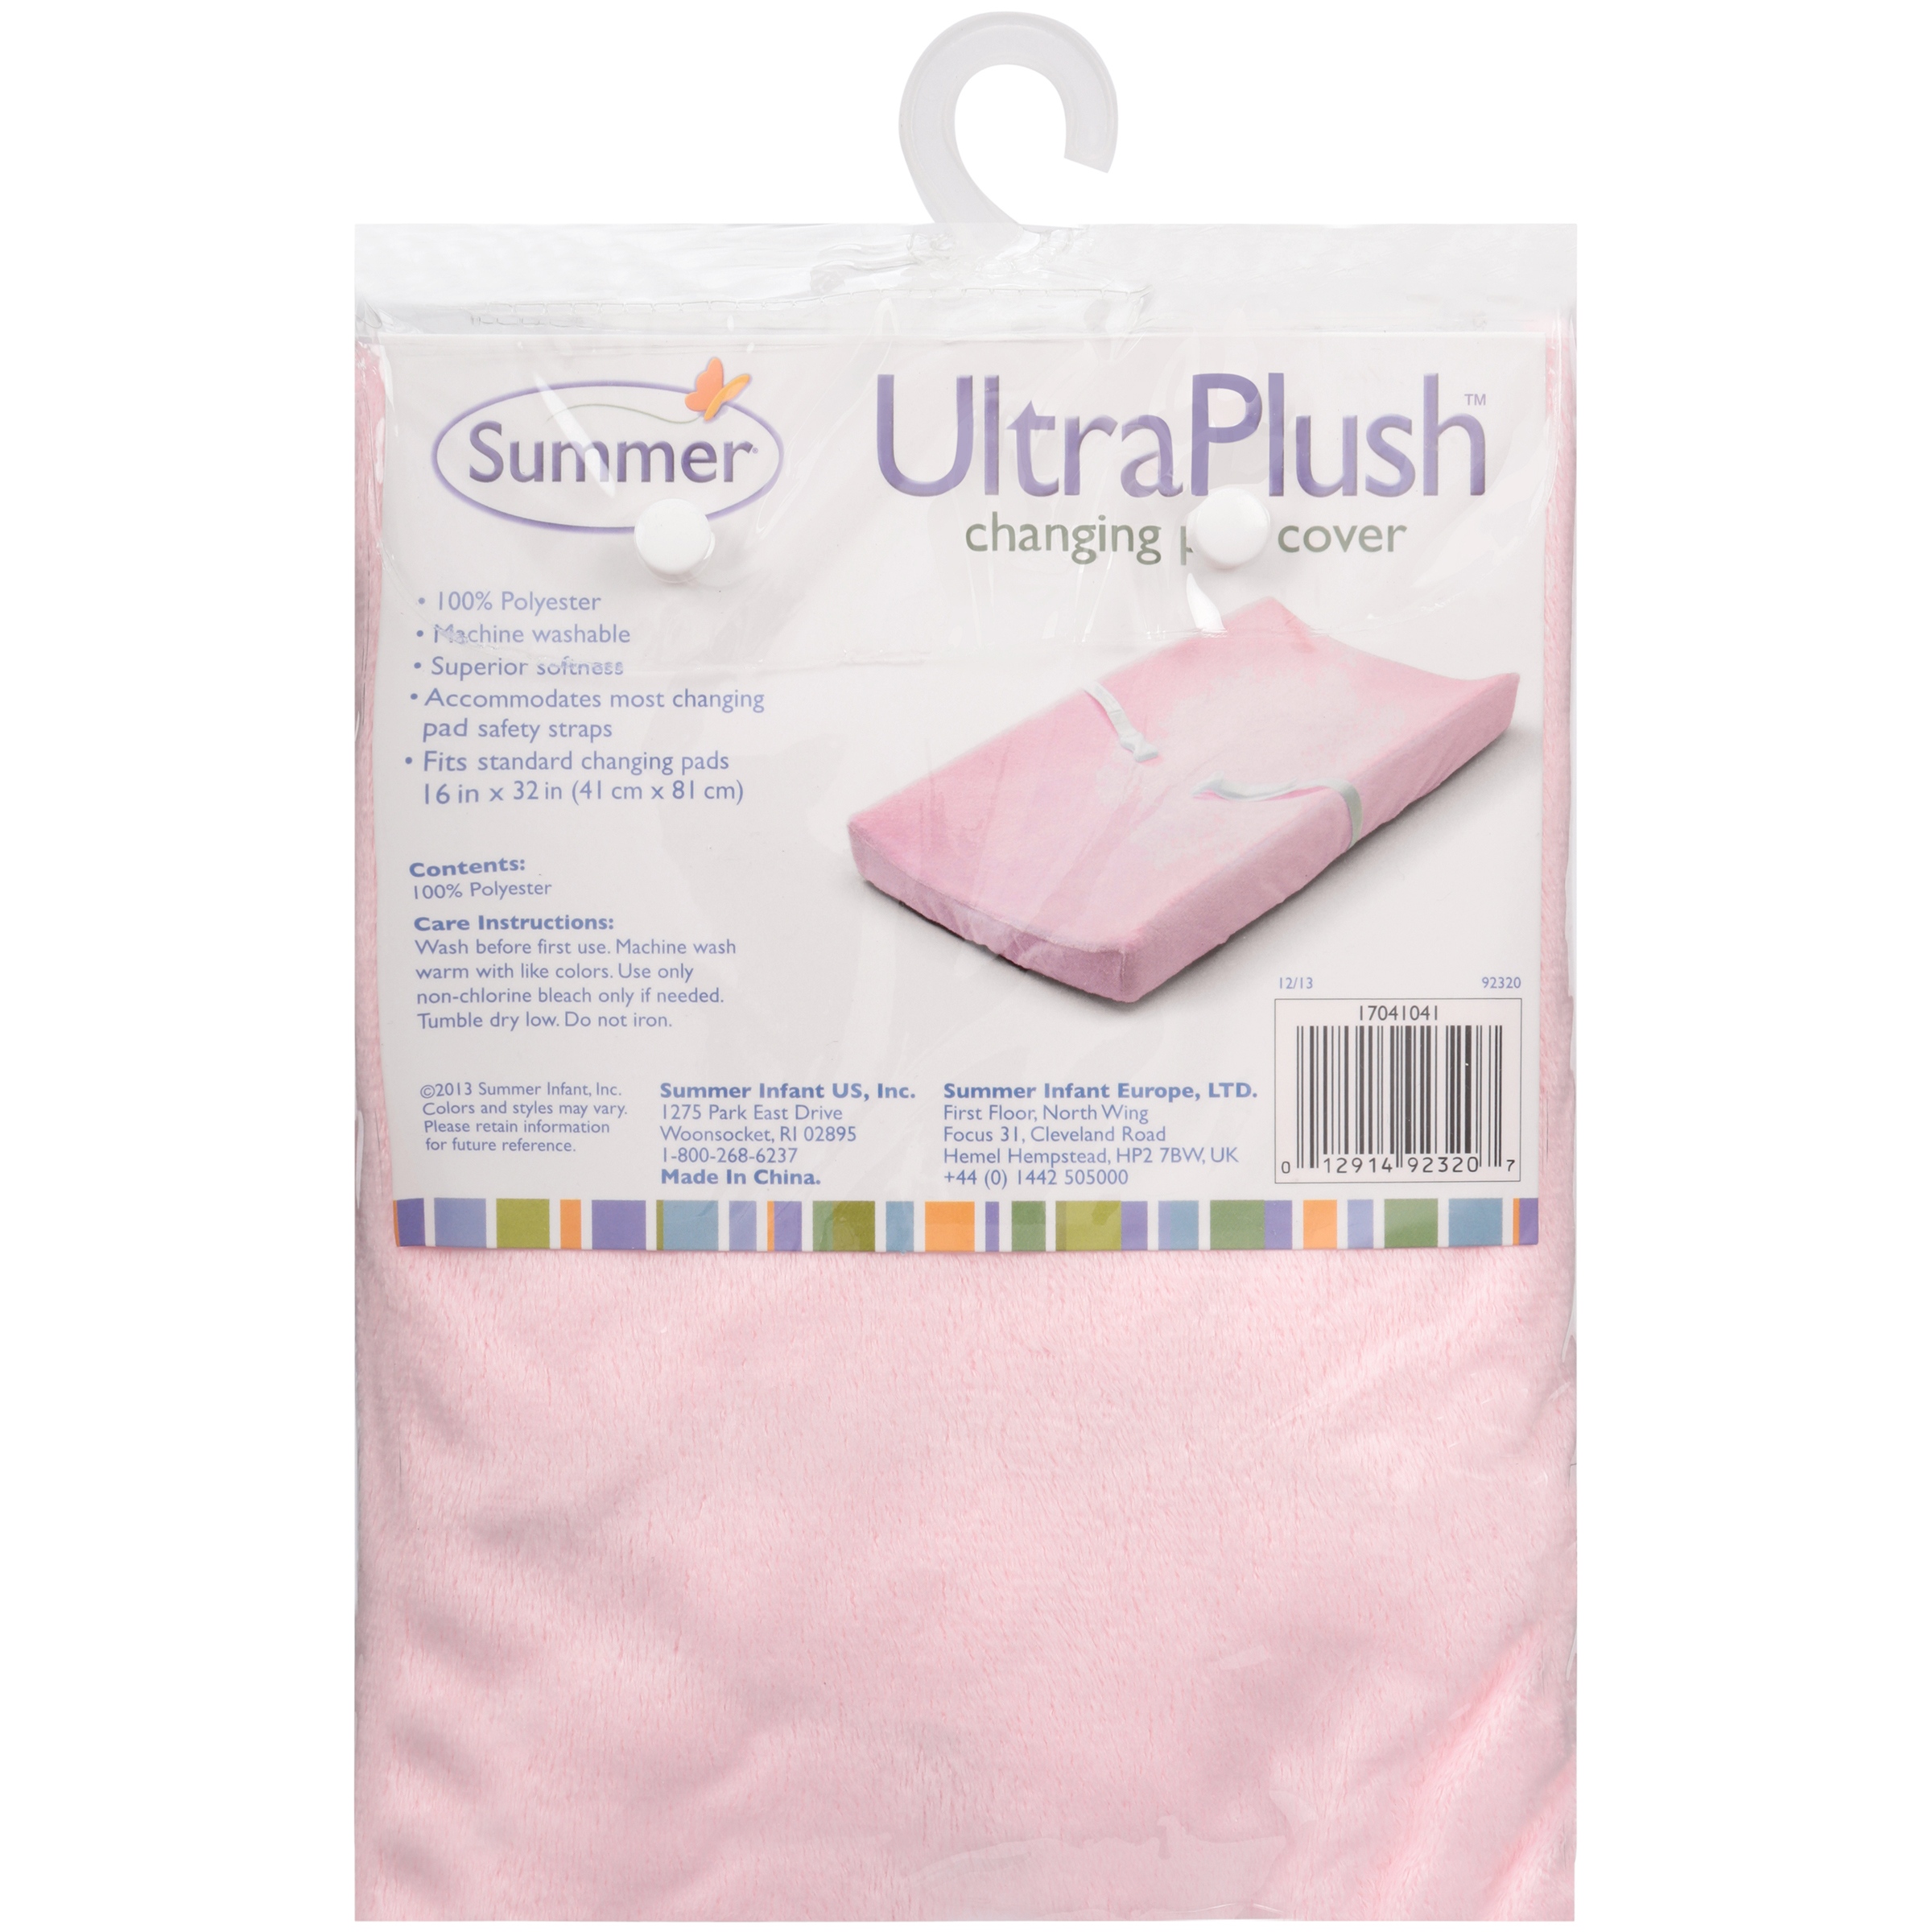 Summer Ultra Plush Changing Pad Cover, Pink - image 2 of 3